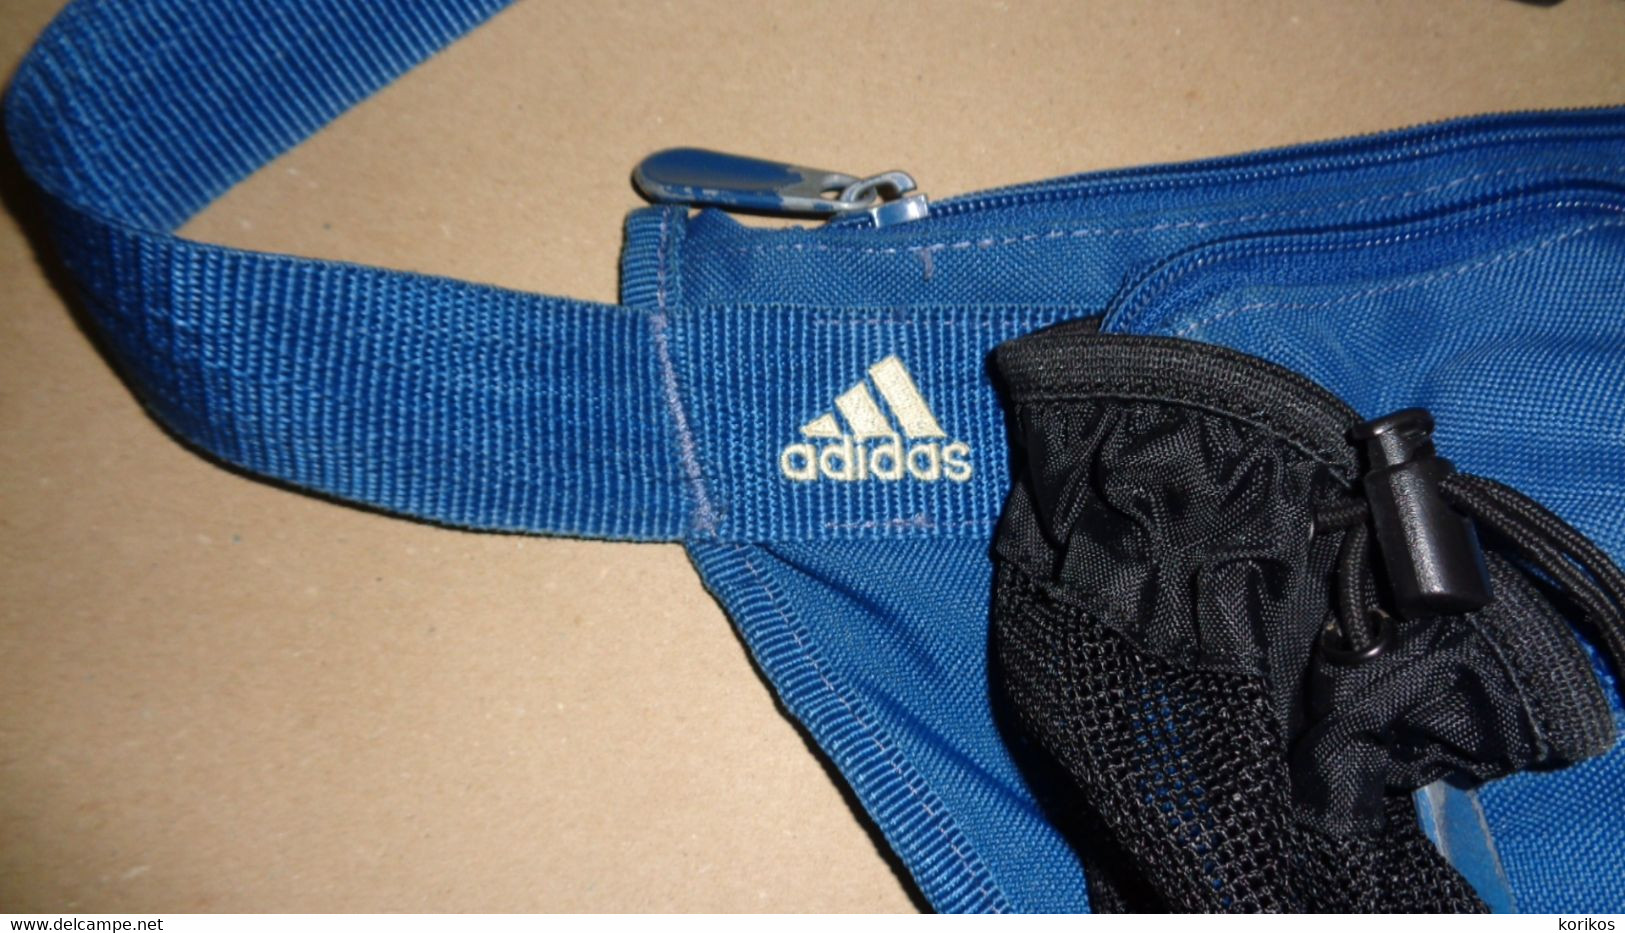 ATHENS 2004 OLYMPIC GAMES - ADIDAS VOLUNTEER BAG – WAIST POUCH – USED - Bekleidung, Souvenirs Und Sonstige